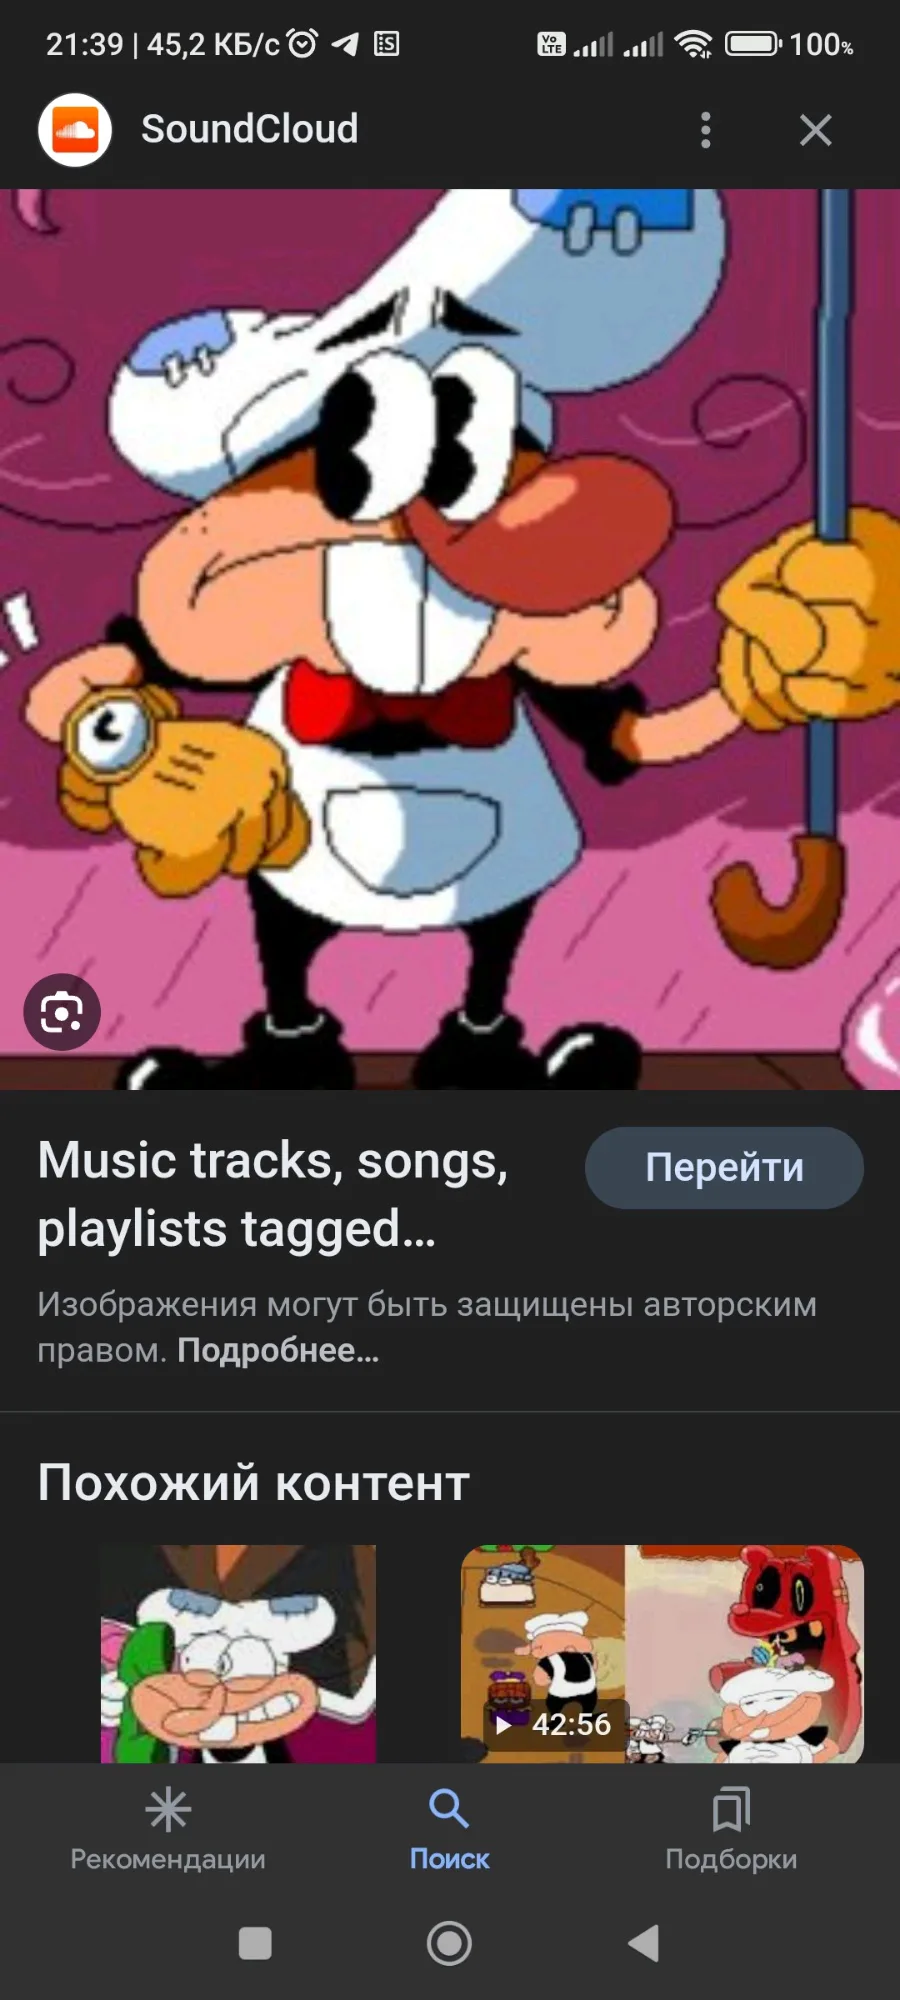 Music tracks, songs, playlists tagged flumpty on SoundCloud